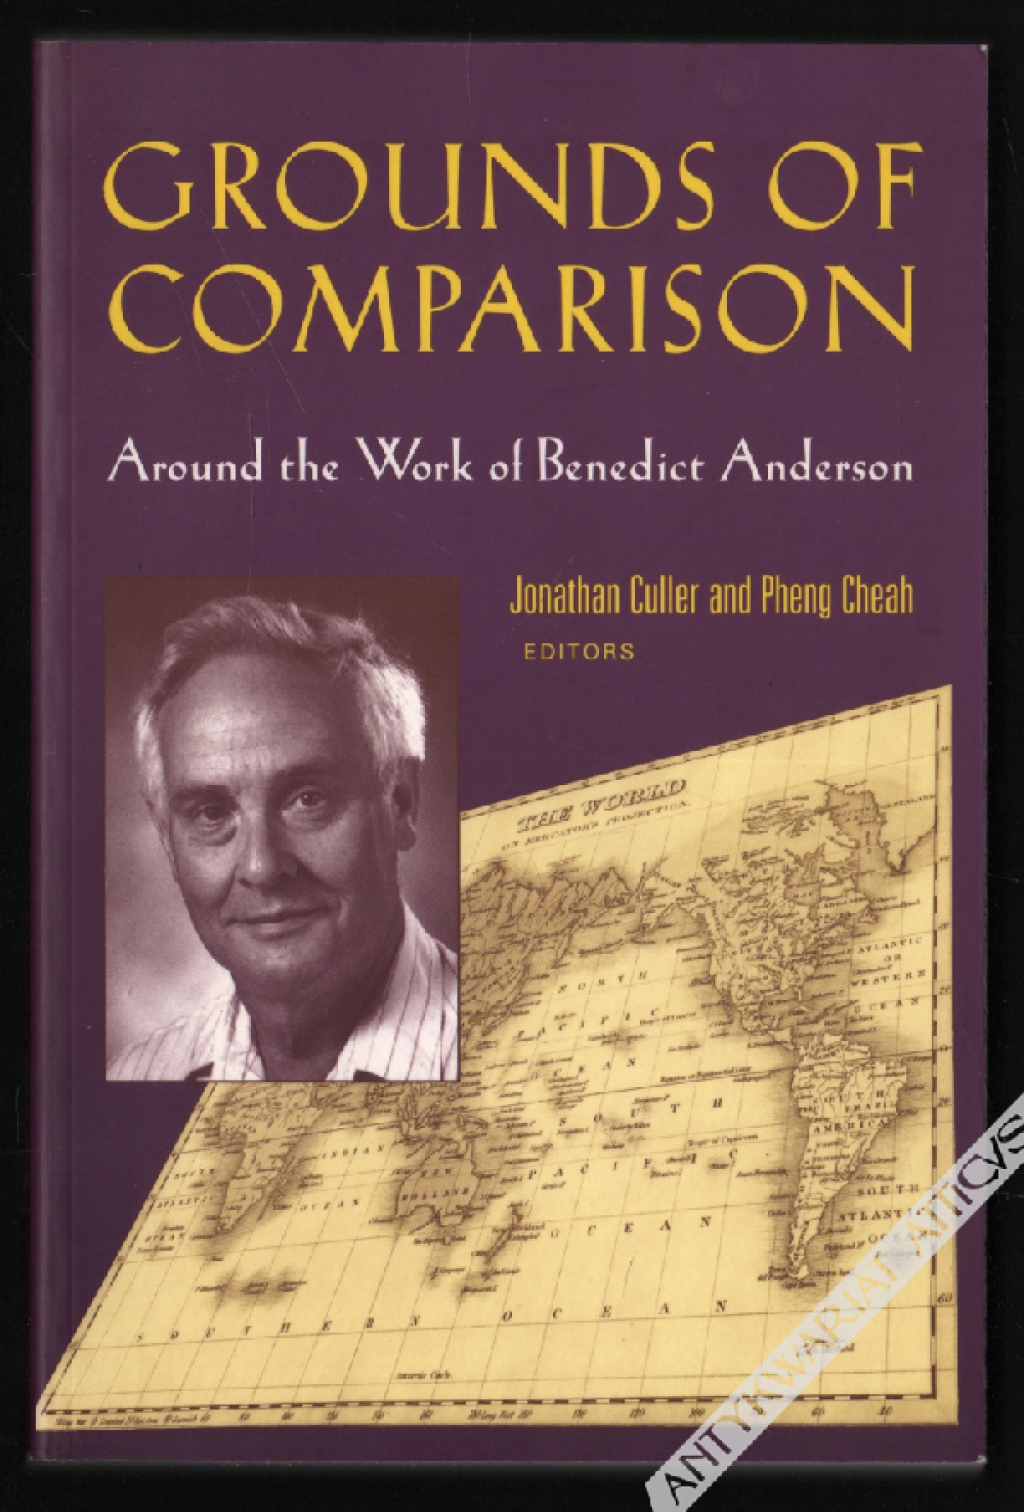 Grounds of Comparison. Around the Work of Benedict Anderson